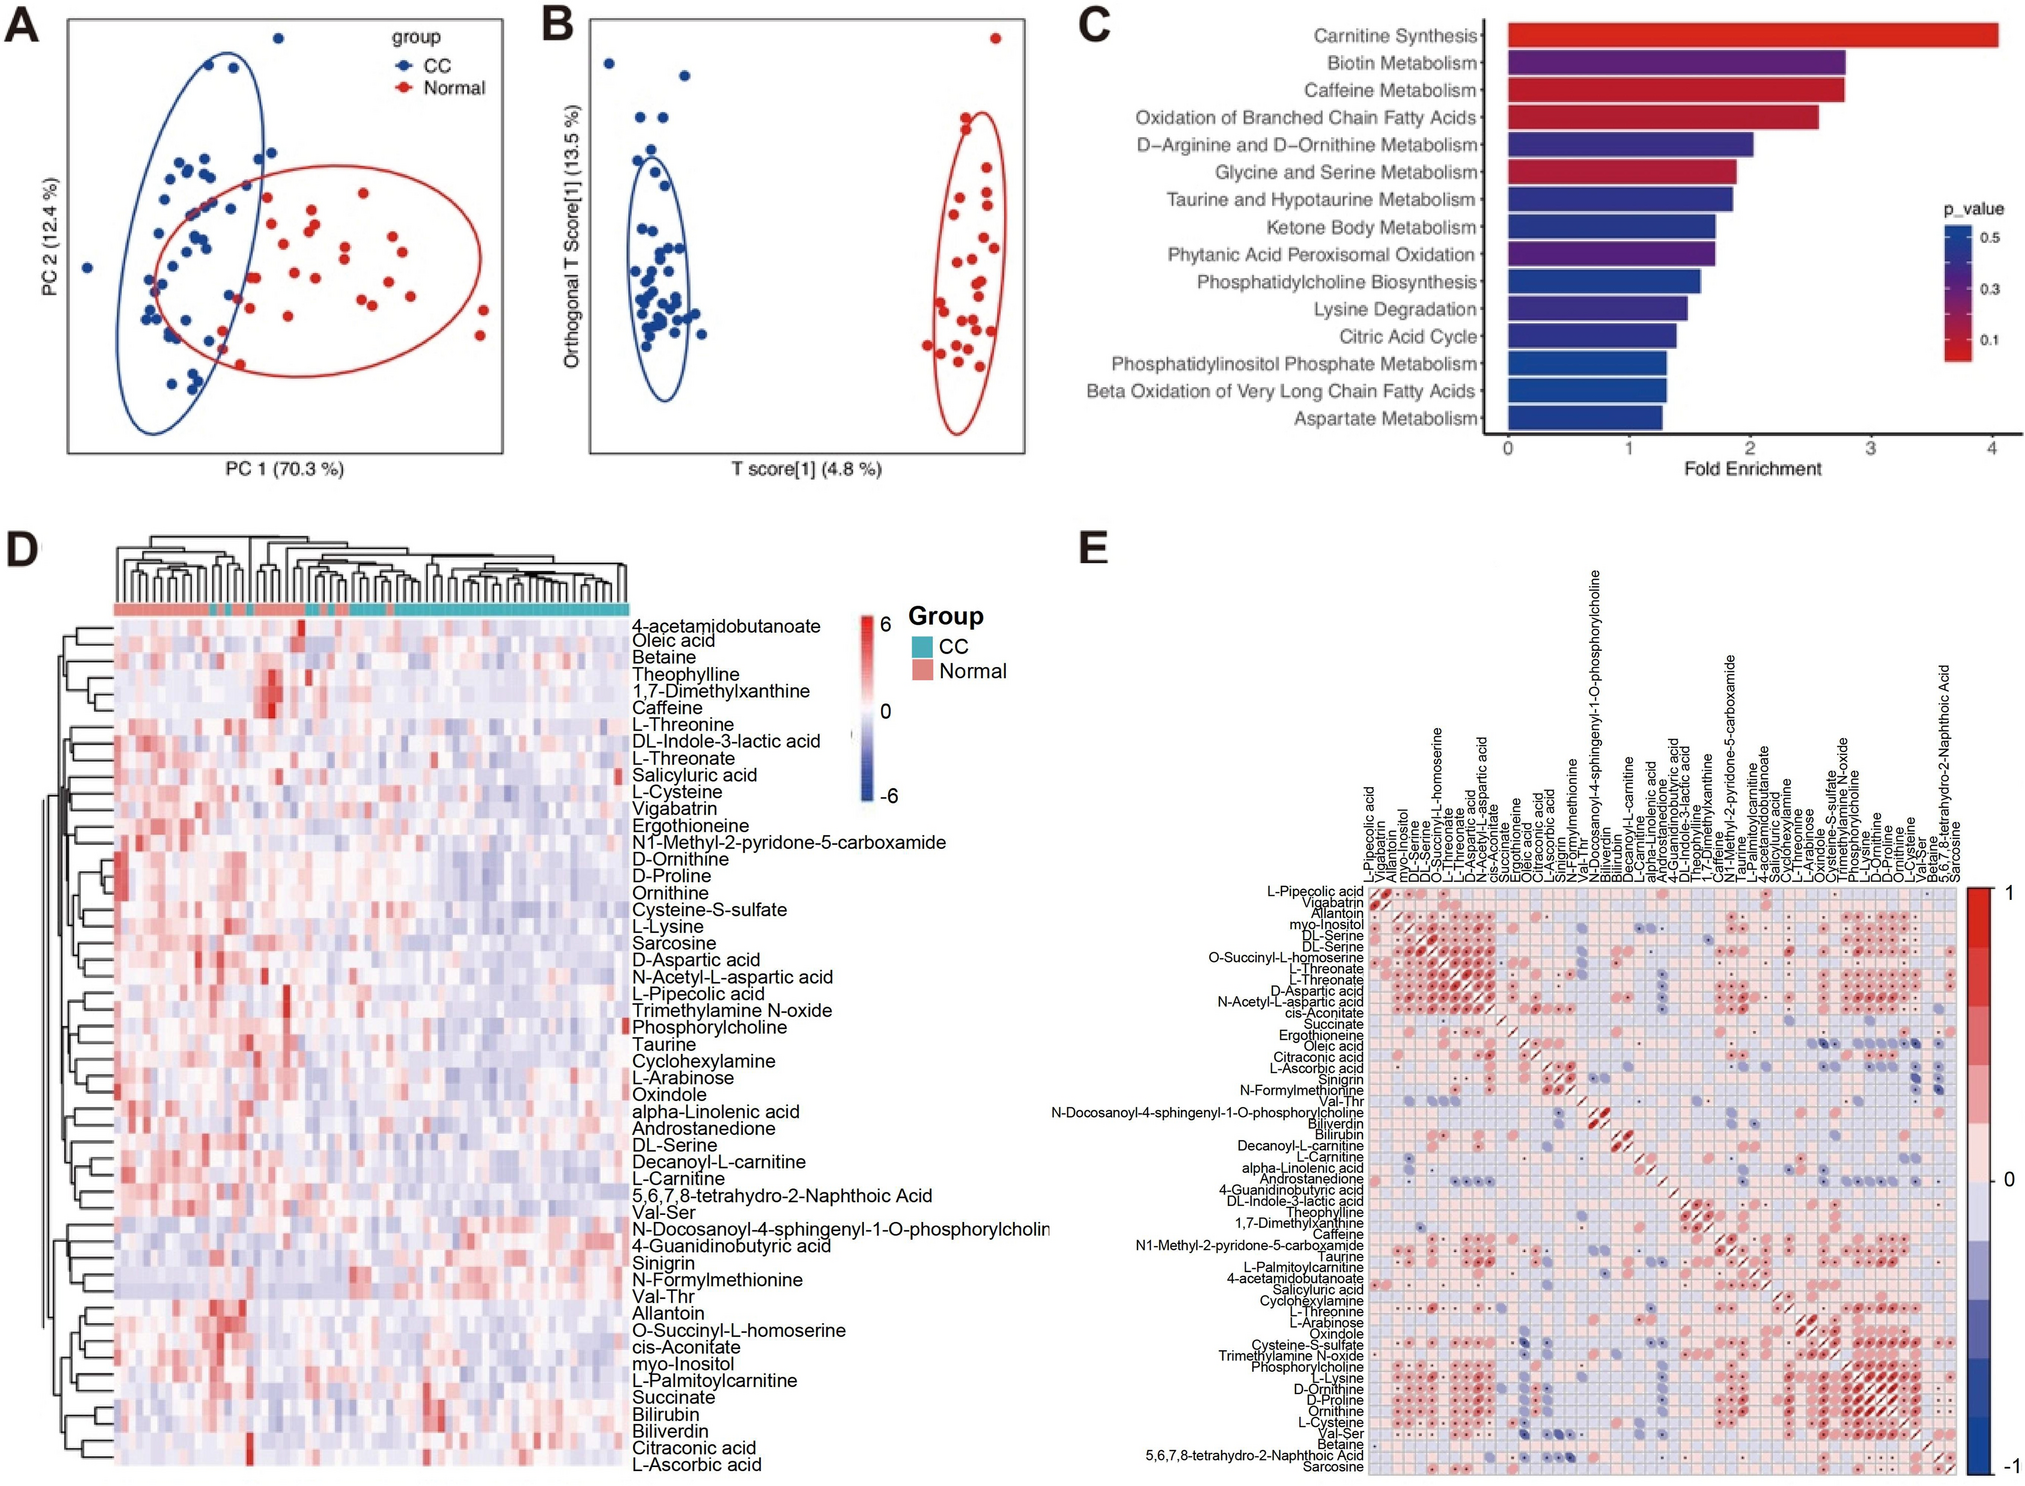 High-throughput metabolomics identifies new biomarkers for cervical cancer